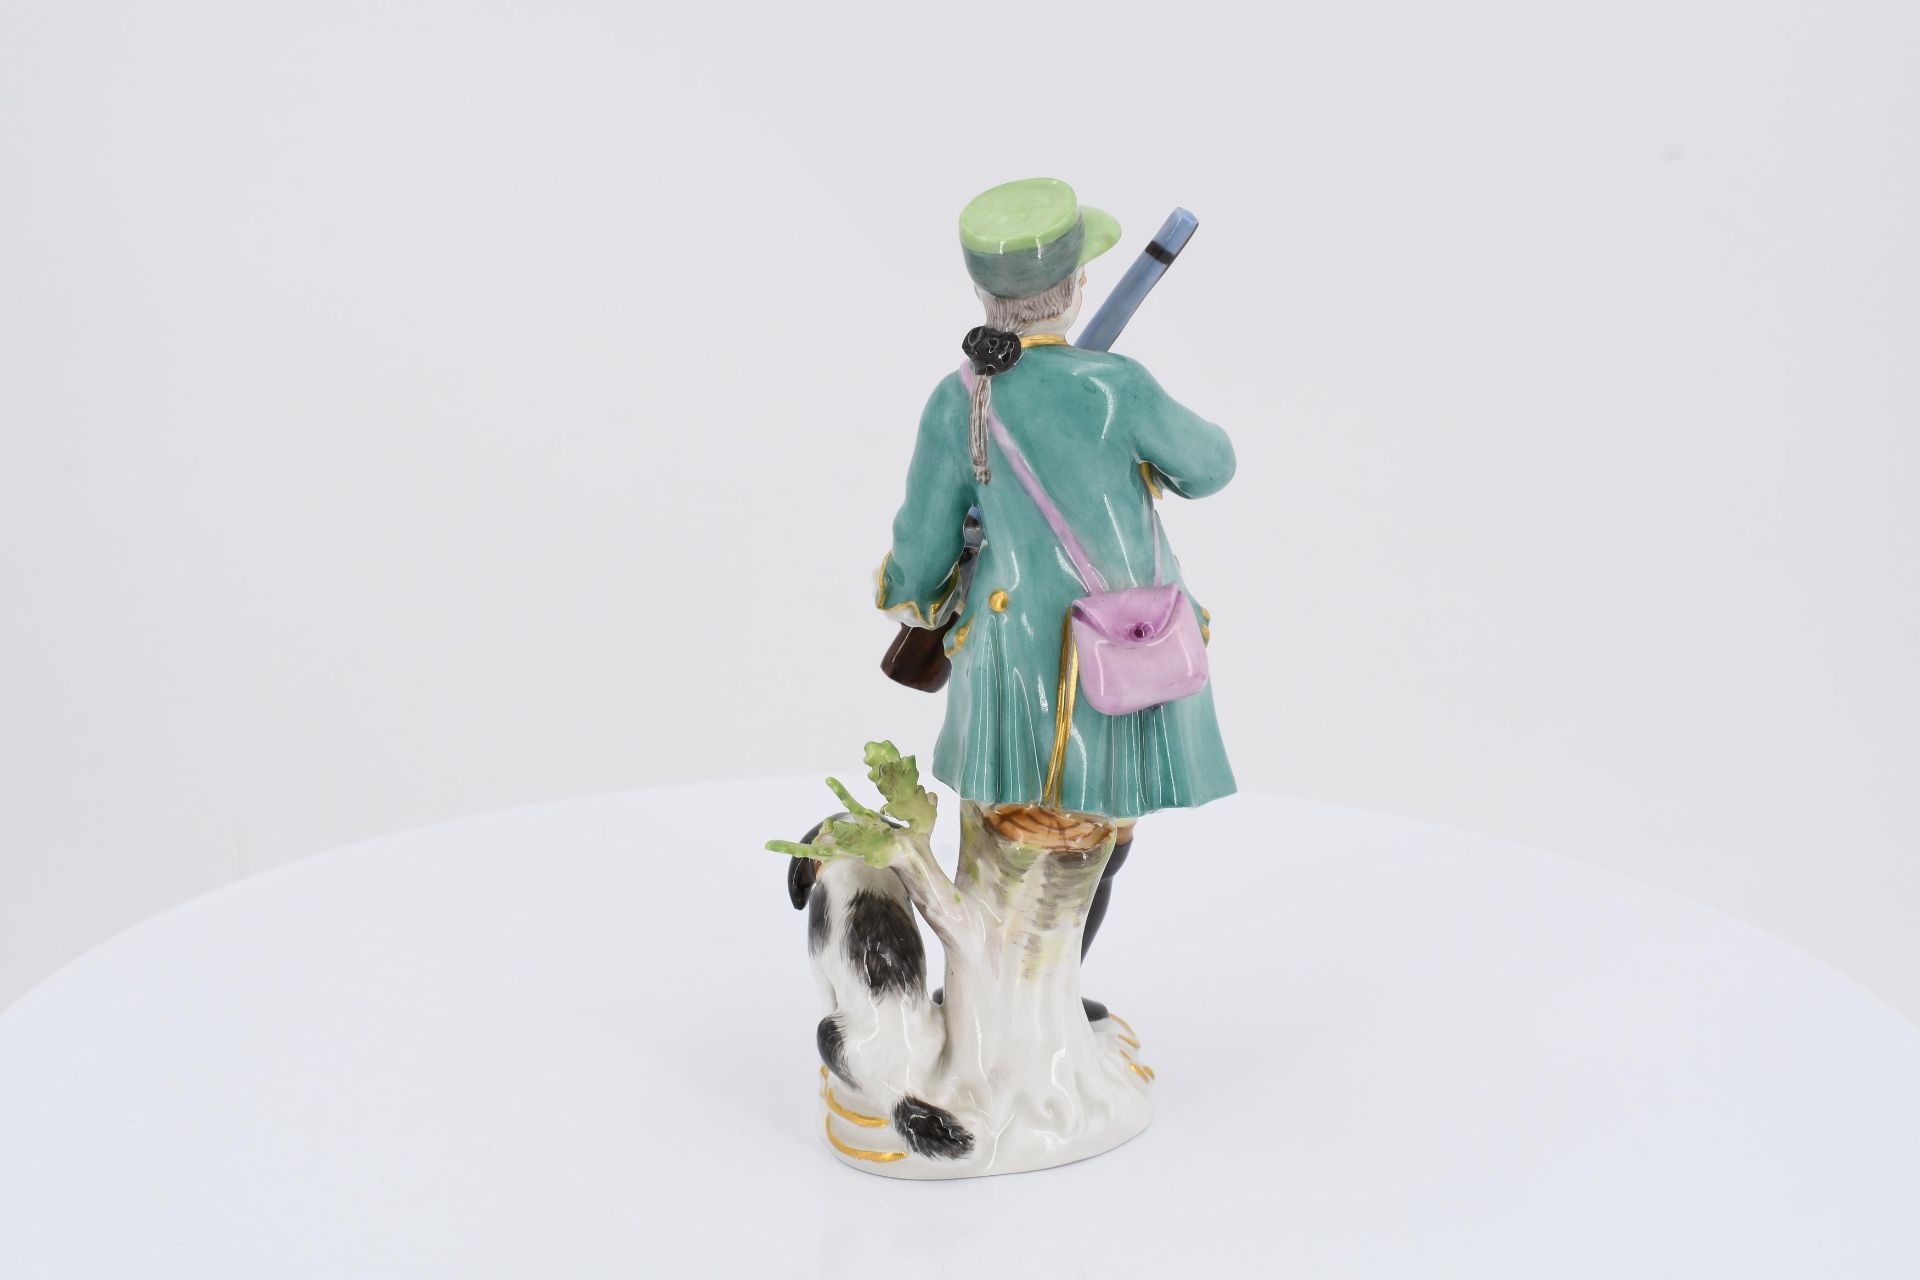 Porcelain figurine of hunter with musket and dog - Image 4 of 6